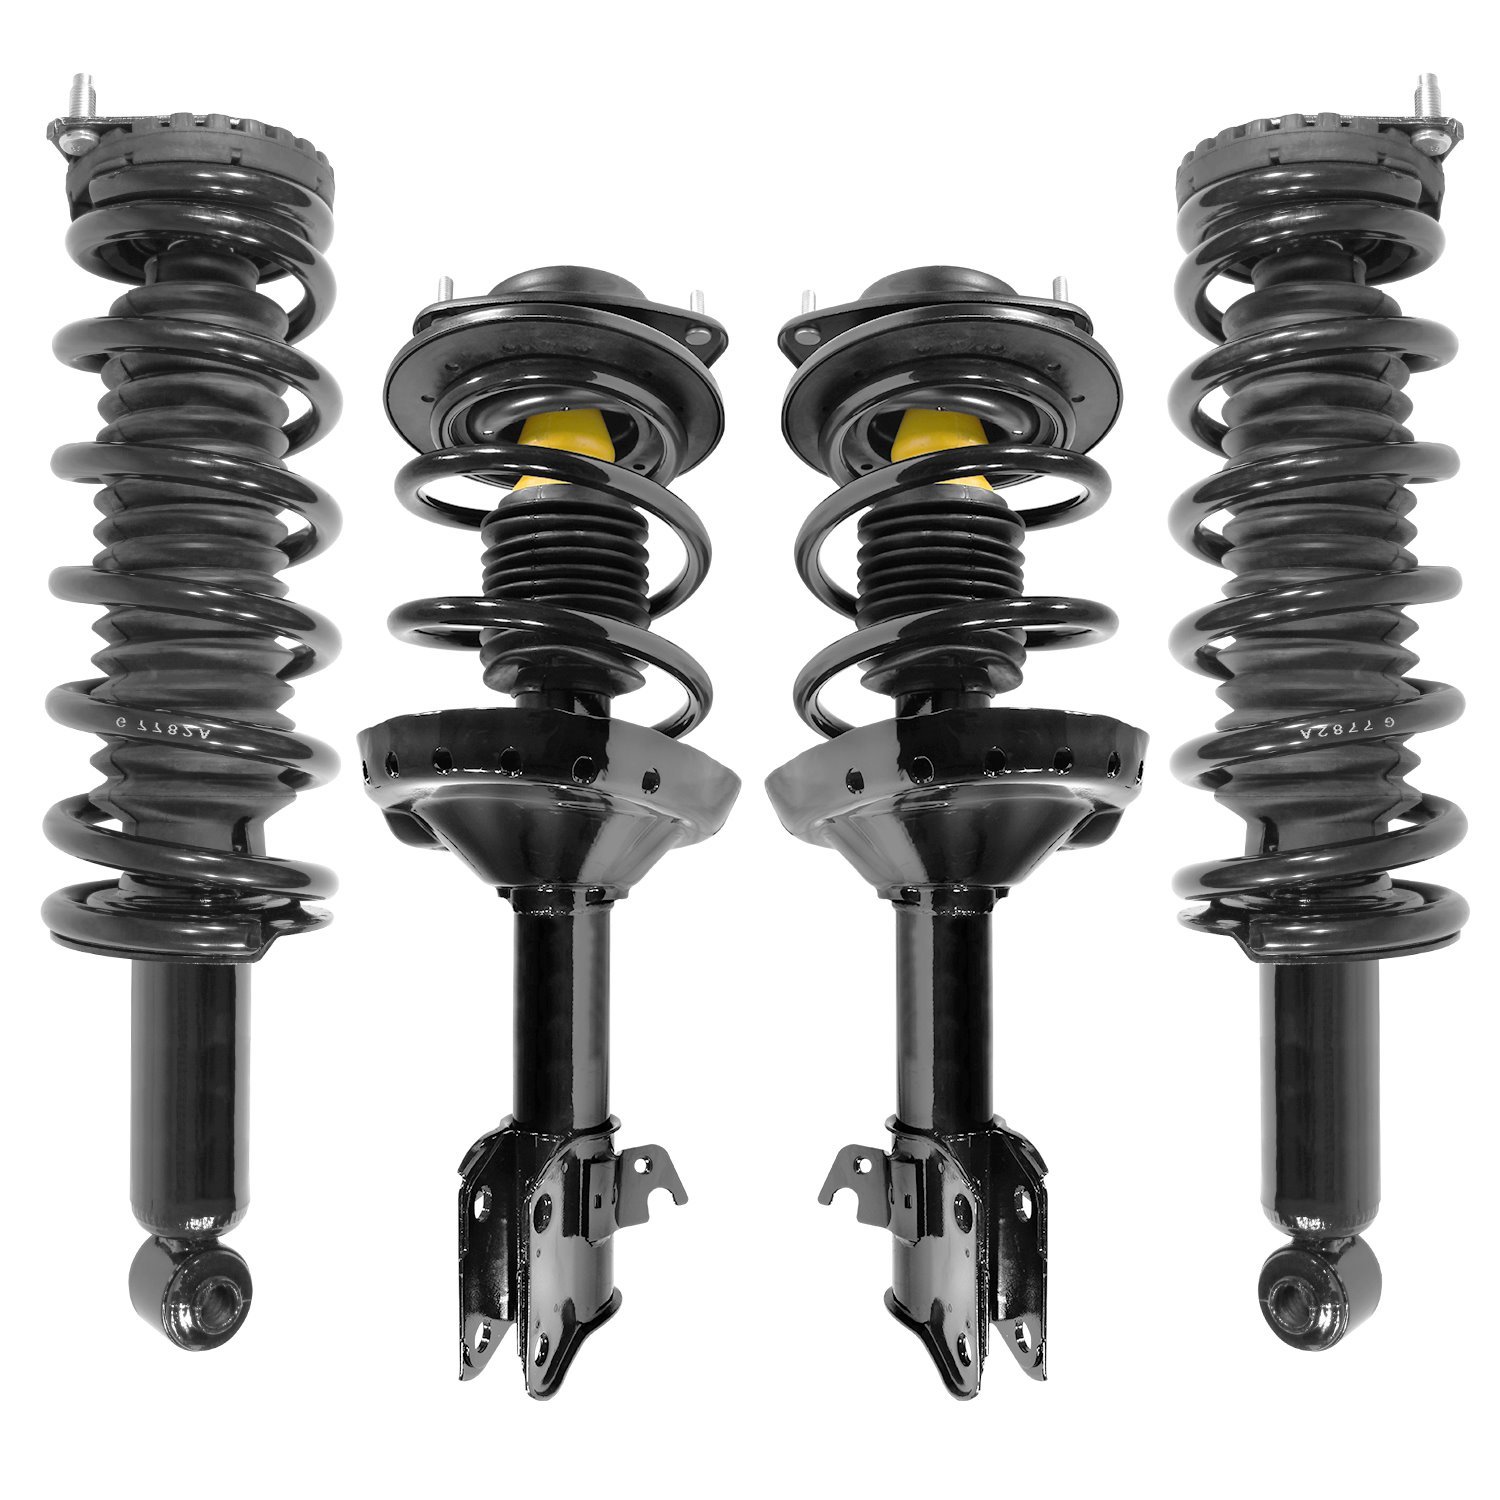 4-11923-15910-001 Front & Rear Suspension Strut & Coil Spring Assembly Kit Fits Select Subaru Legacy